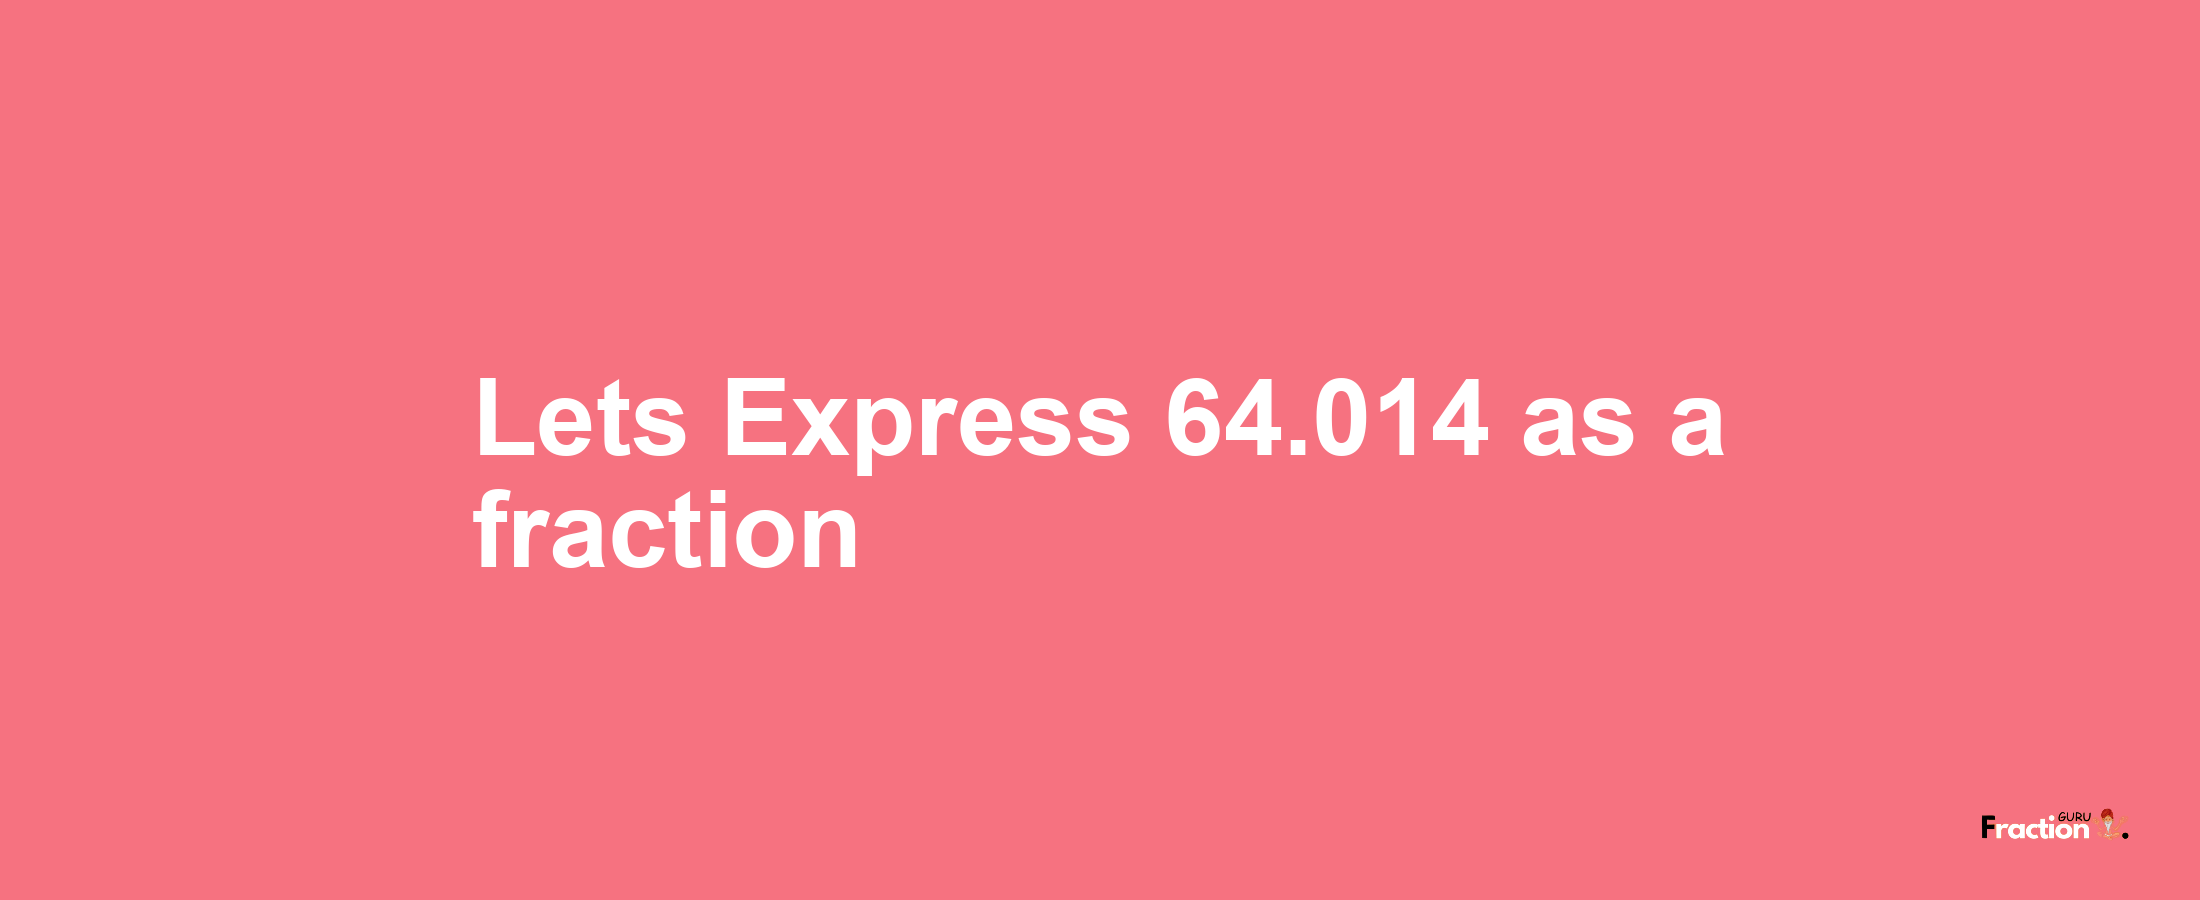 Lets Express 64.014 as afraction